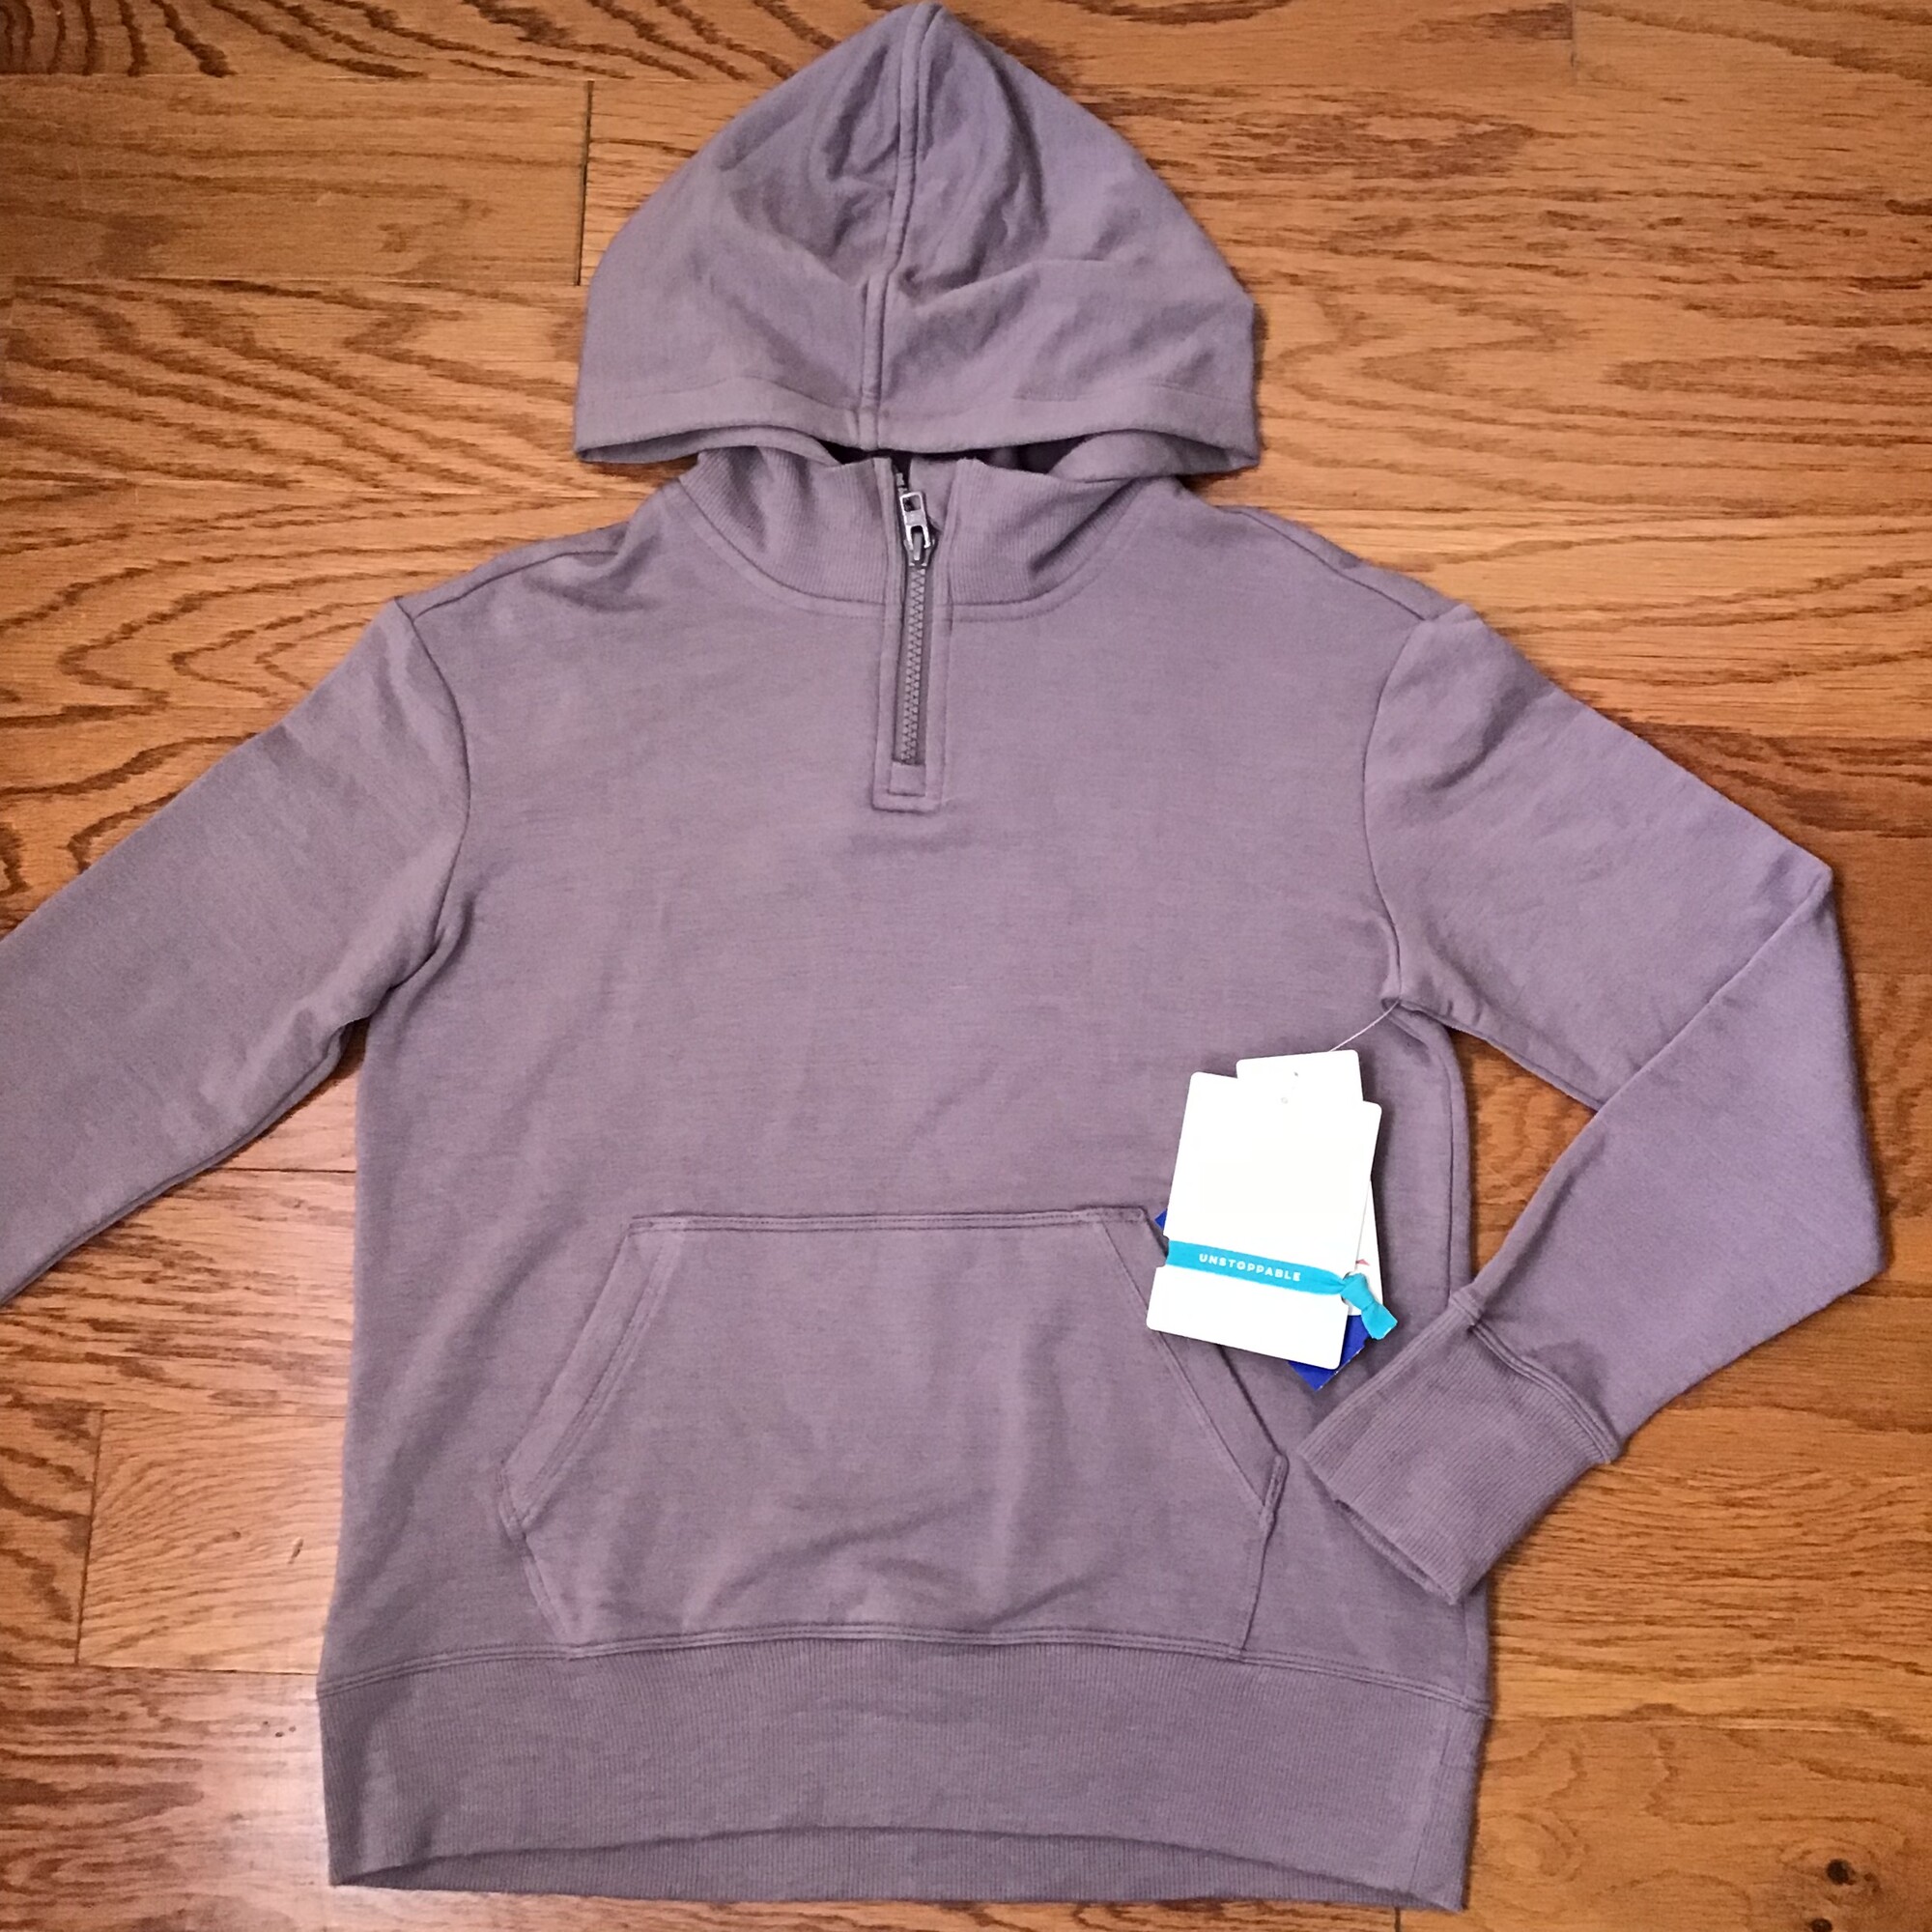 Athleta Girl Pullover NEW, Lilac, Size: 8-10

brand new with $49 tag

ALL ONLINE SALES ARE FINAL.
NO RETURNS
REFUNDS
OR EXCHANGES

PLEASE ALLOW AT LEAST 1 WEEK FOR SHIPMENT. THANK YOU FOR SHOPPING SMALL!